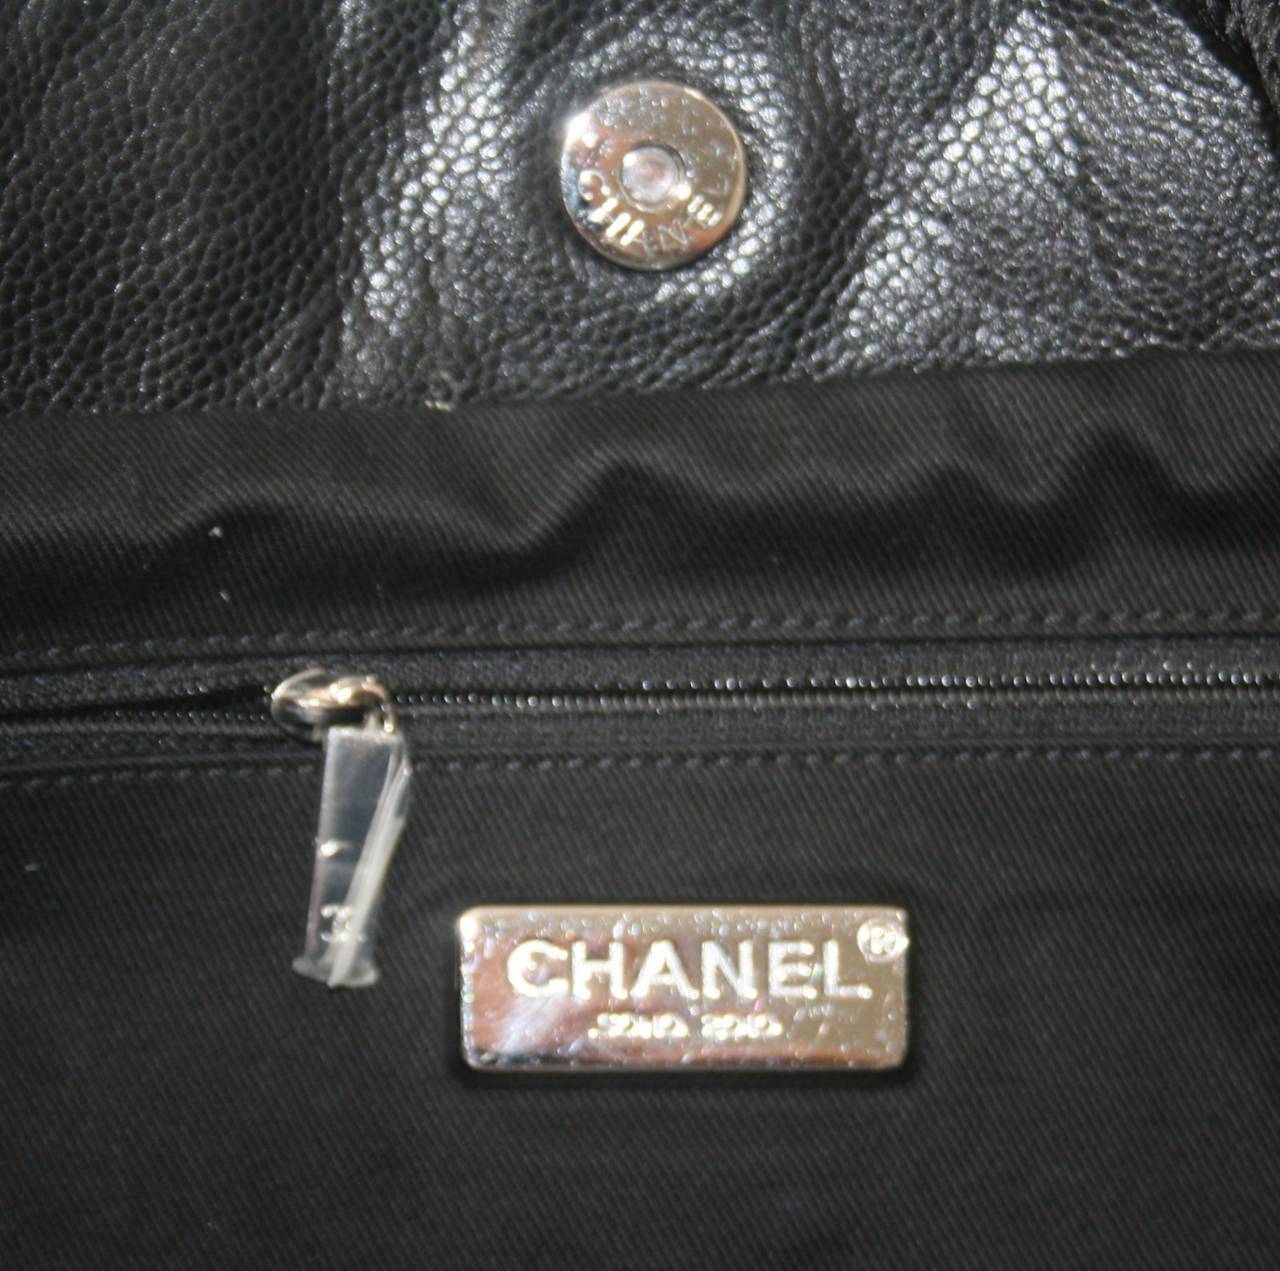 Chanel Black Caviar Leather Zip Around Expandable Tote Bag For Sale 5